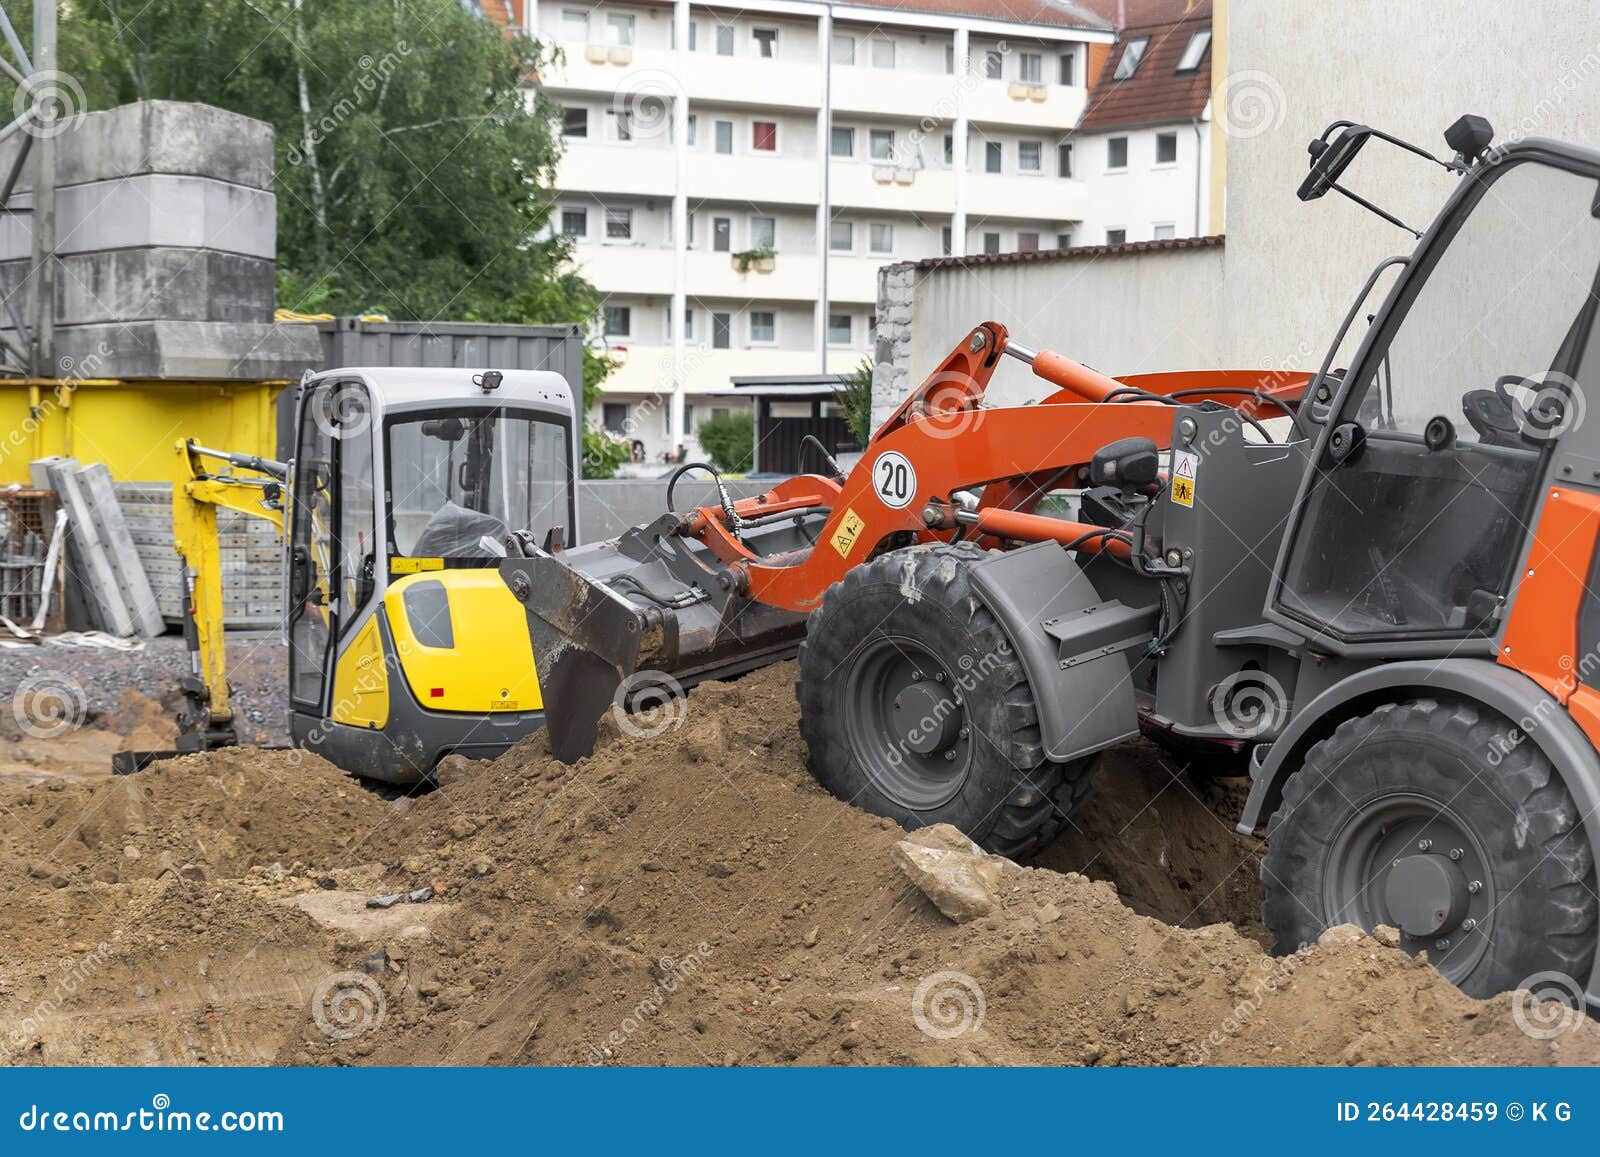 Small Loader and Excavator Digger Machine Moving Heap of Earth and Debris  Rubble at Construction Site. New Building Stock Image - Image of mover,  house: 264428459